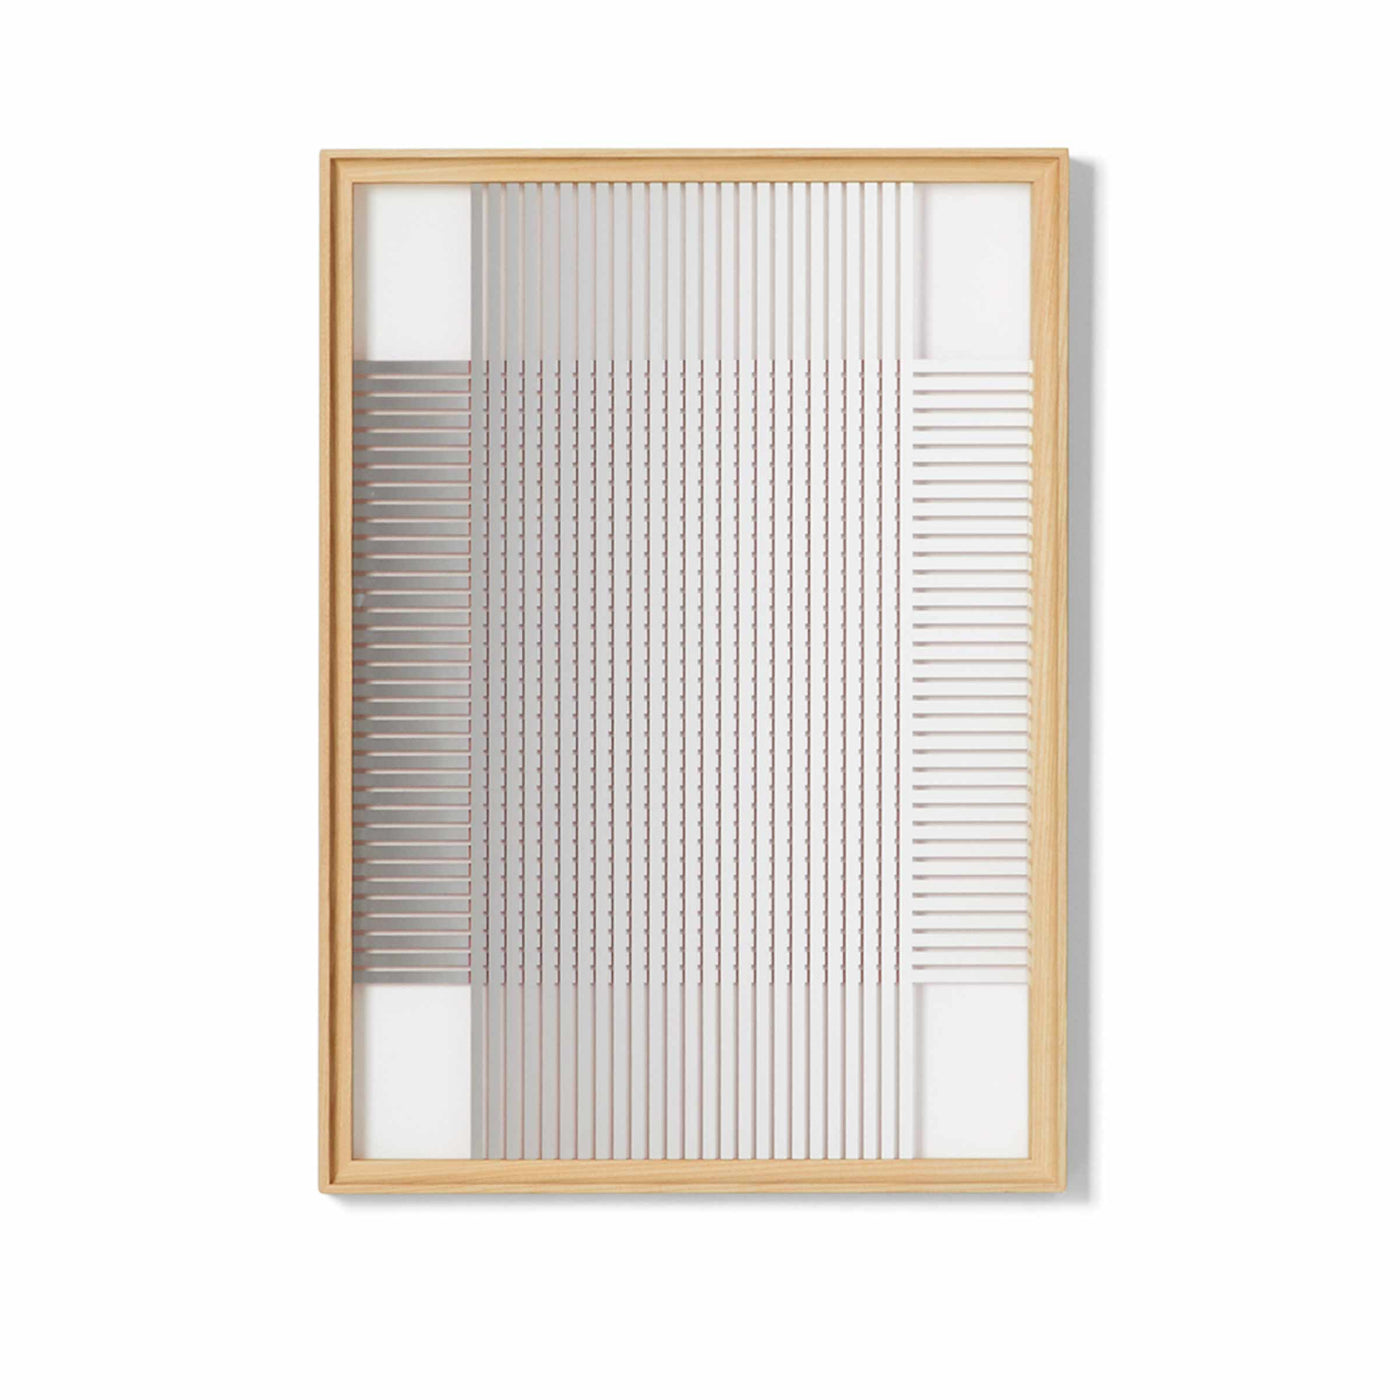 Rectangular Mirror DEADLINE CROSSING PATHS, designed by Ron Gilad for Cassina 01